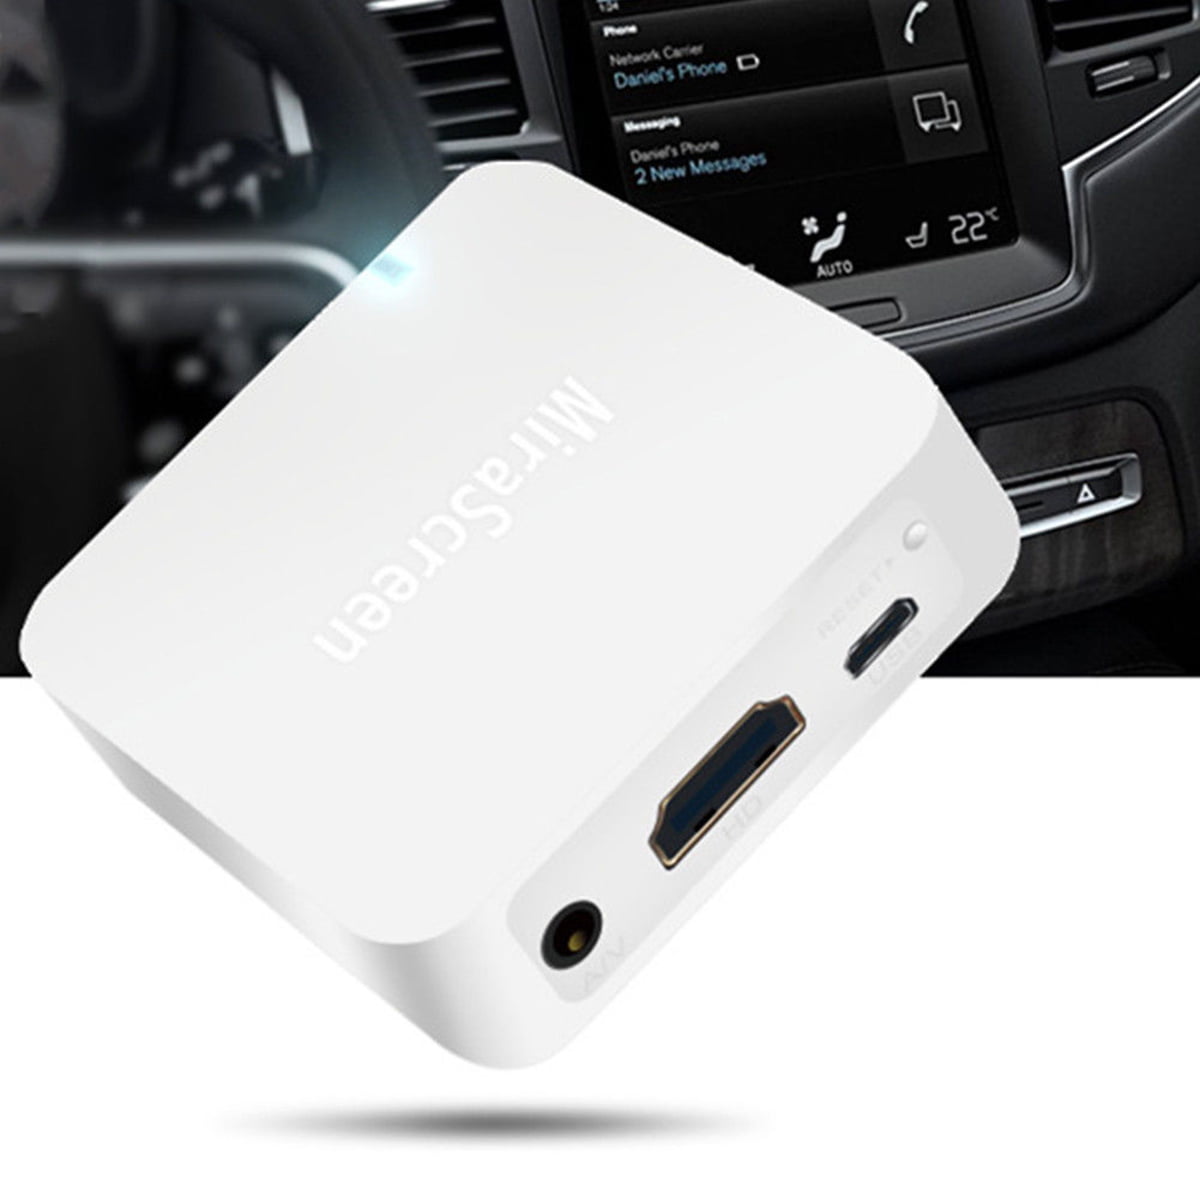 For iPhone Android Car Home Wifi Mirror Link Wireless Airplay DLNA Miracast HDMI 